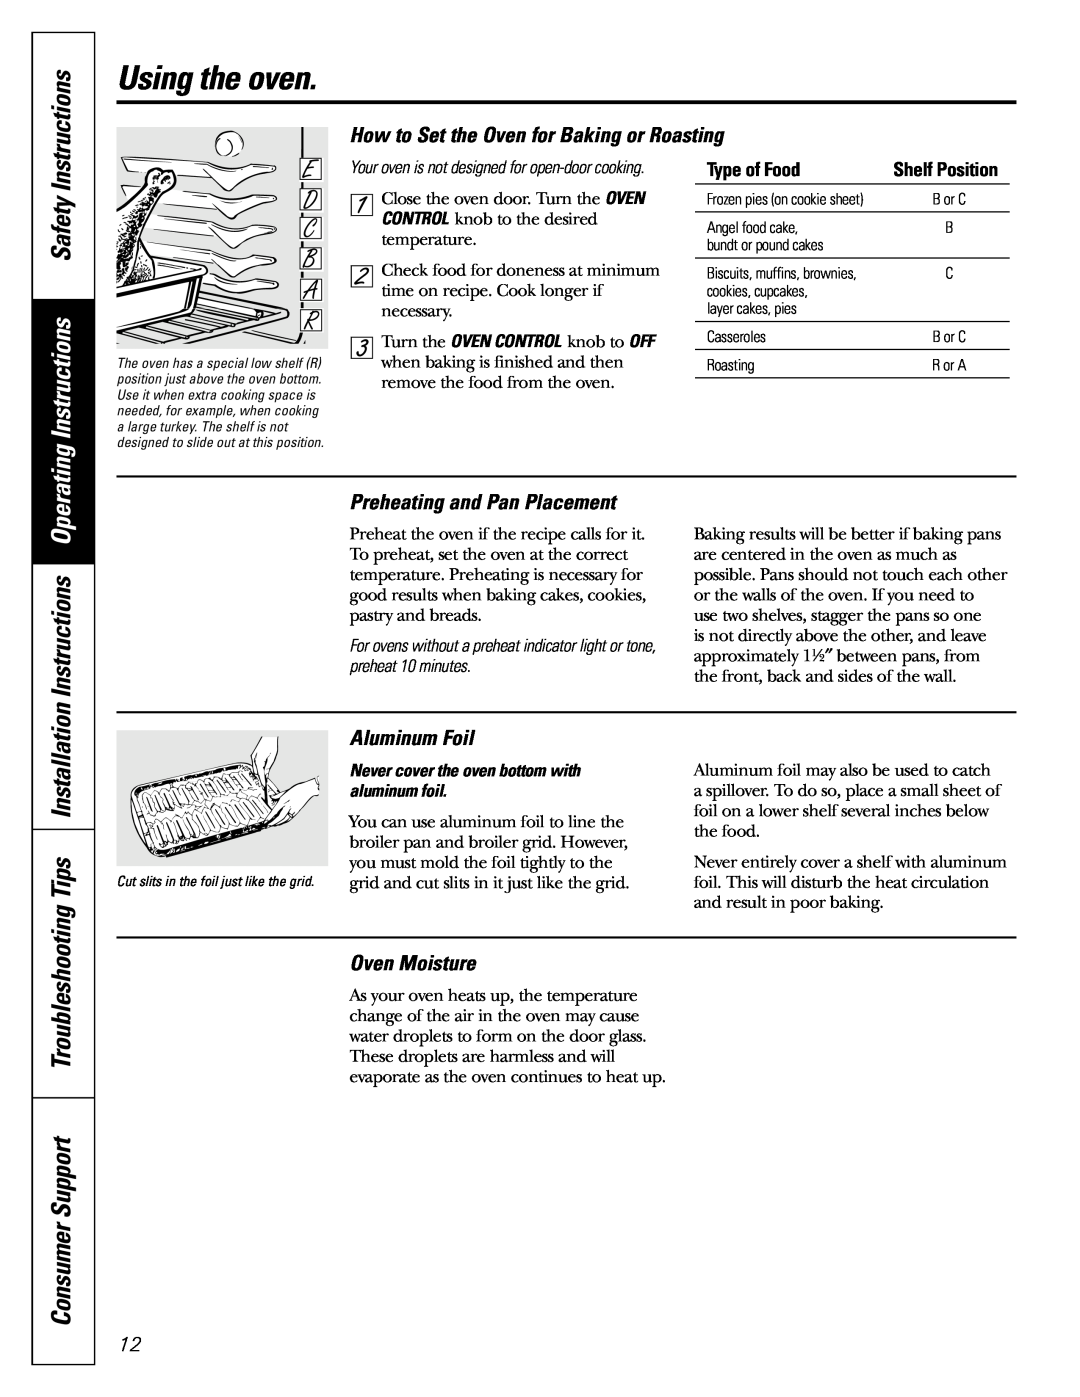 Americana Appliances AGBS300 Instructions Operating, How to Set the Oven for Baking or Roasting, Aluminum Foil 